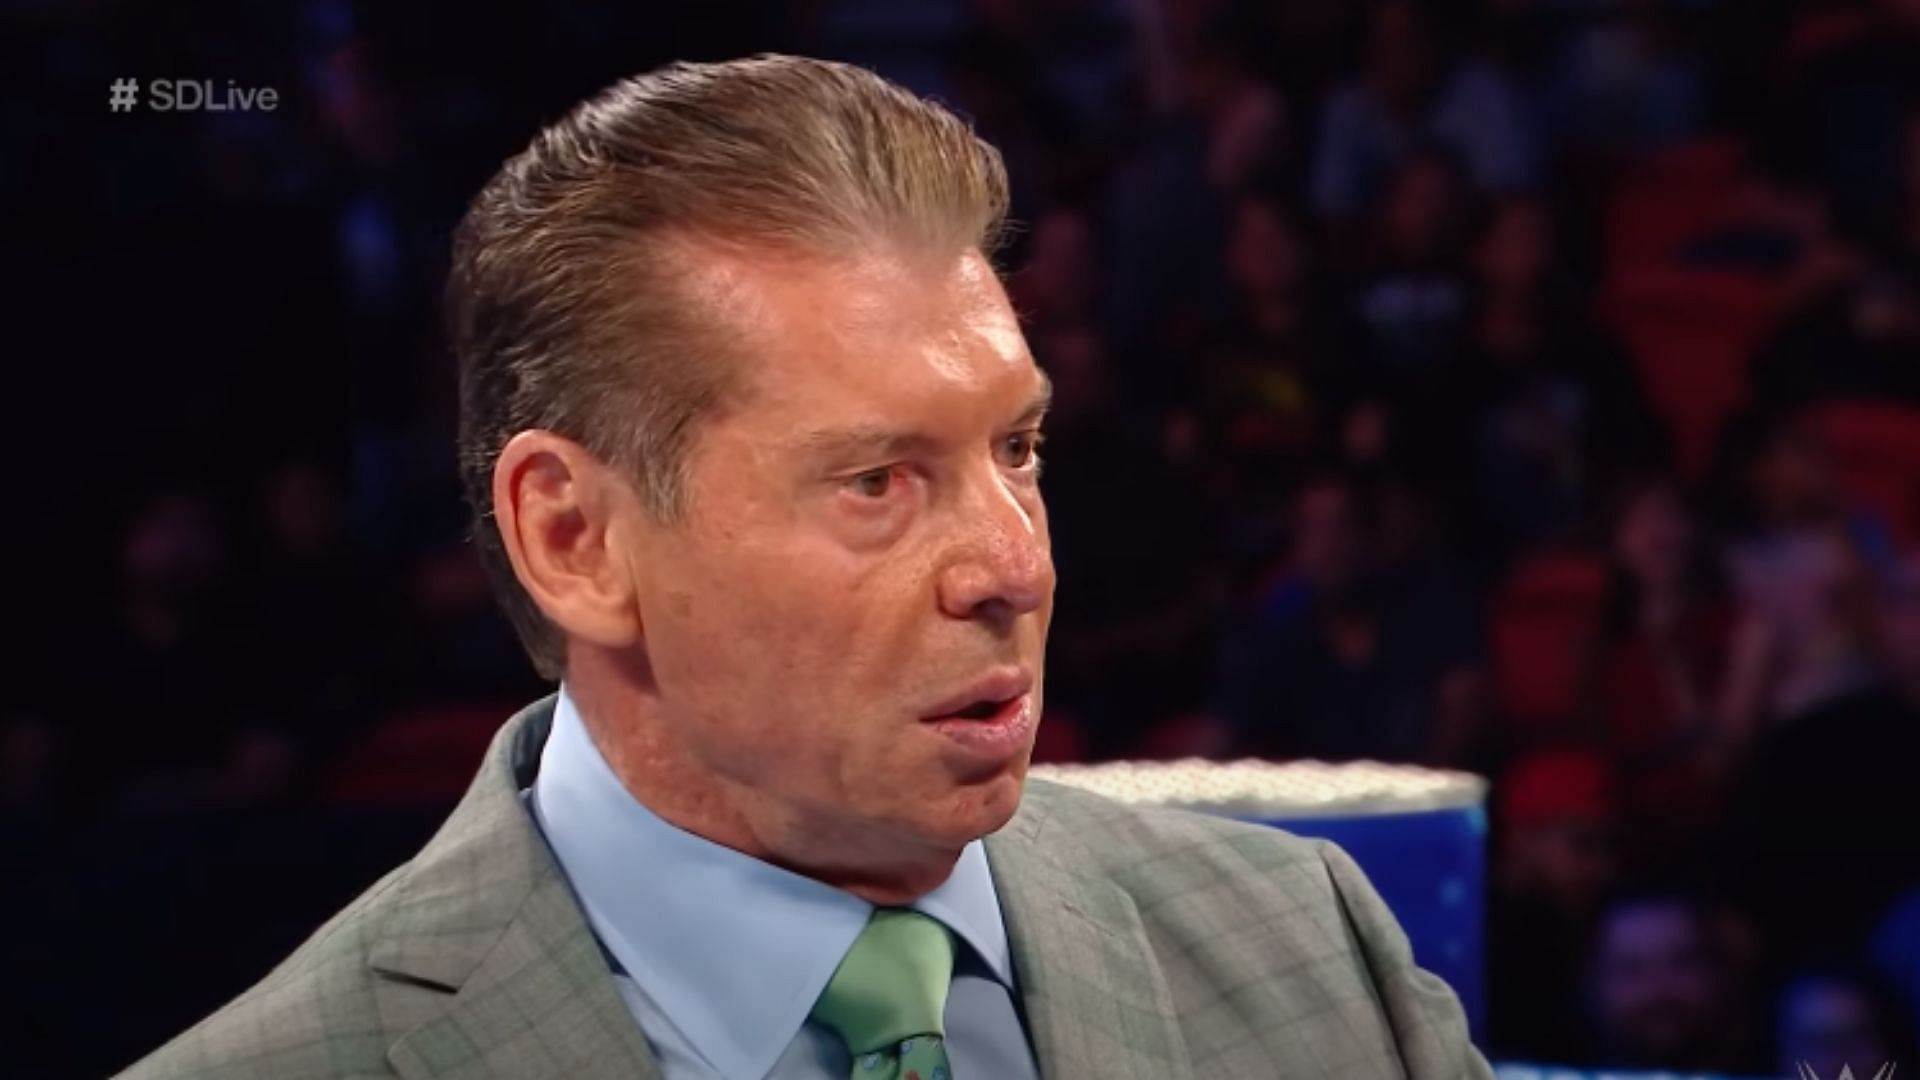 Vince McMahon likes to give superstars specific instructions.